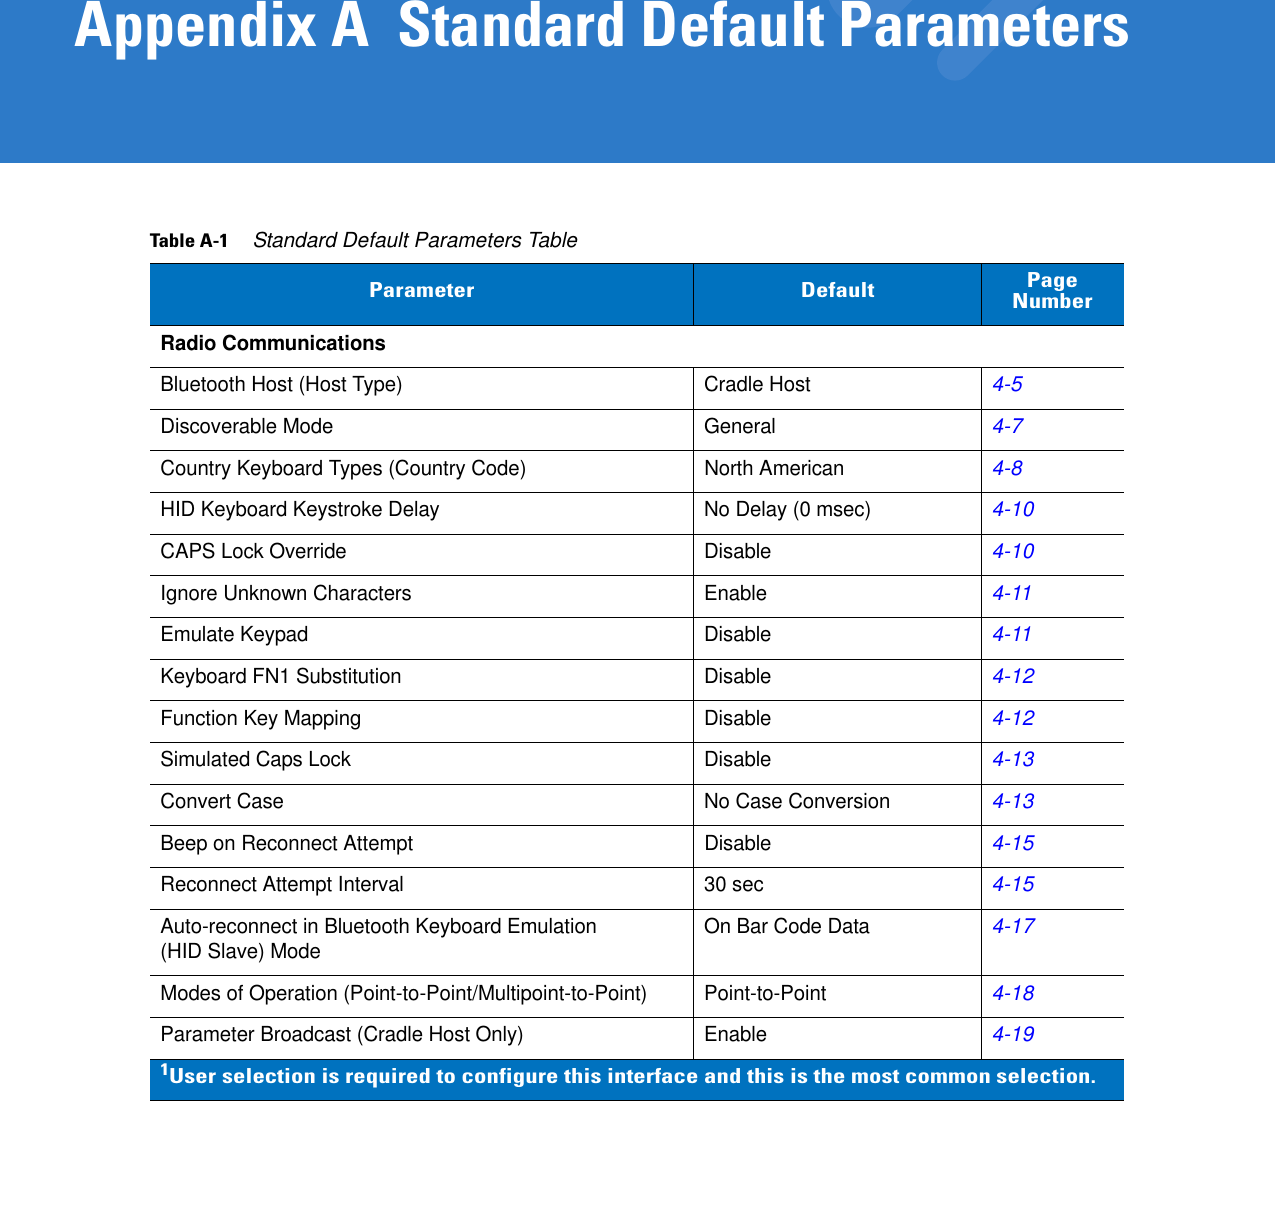 Appendix A  Standard Default ParametersTable A-1     Standard Default Parameters TableParameter Default Page NumberRadio CommunicationsBluetooth Host (Host Type) Cradle Host4-5Discoverable Mode General4-7Country Keyboard Types (Country Code) North American4-8HID Keyboard Keystroke Delay No Delay (0 msec)4-10CAPS Lock Override Disable4-10Ignore Unknown Characters Enable4-11Emulate Keypad Disable4-11Keyboard FN1 Substitution Disable4-12Function Key Mapping Disable4-12Simulated Caps Lock Disable4-13Convert Case No Case Conversion4-13Beep on Reconnect Attempt Disable4-15Reconnect Attempt Interval 30 sec4-15Auto-reconnect in Bluetooth Keyboard Emulation(HID Slave) Mode On Bar Code Data4-17Modes of Operation (Point-to-Point/Multipoint-to-Point) Point-to-Point4-18Parameter Broadcast (Cradle Host Only) Enable4-191User selection is required to configure this interface and this is the most common selection.